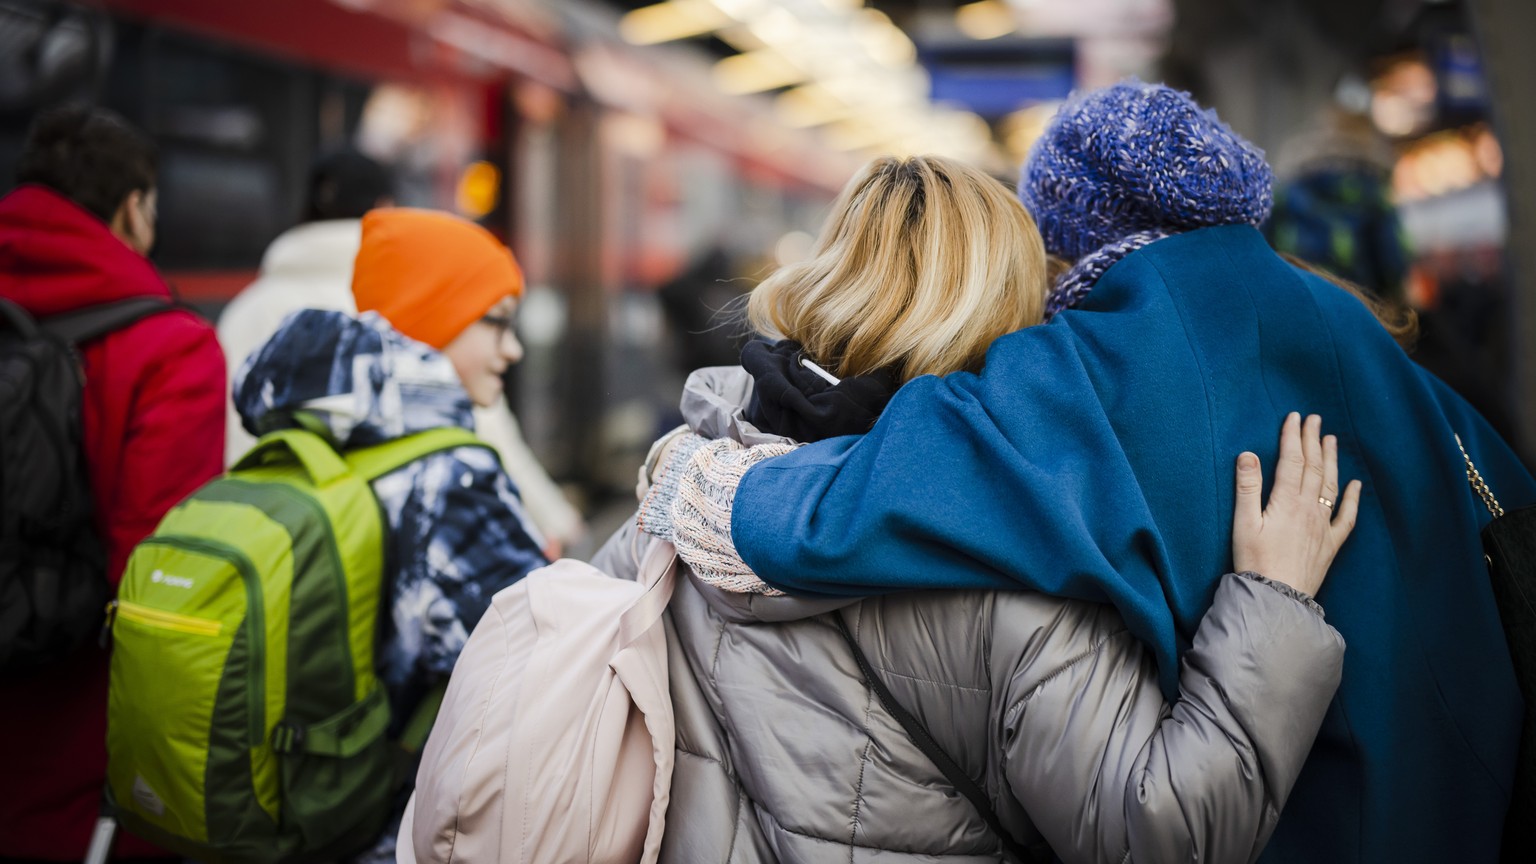 A woman from Ukraine is welcomed after her arrival with her family at Zurich&#039;s central station, following Russia&#039;s invasion of Ukraine, in Zurich, Switzerland on March 9, 2022. (KEYSTONE/Mic ...